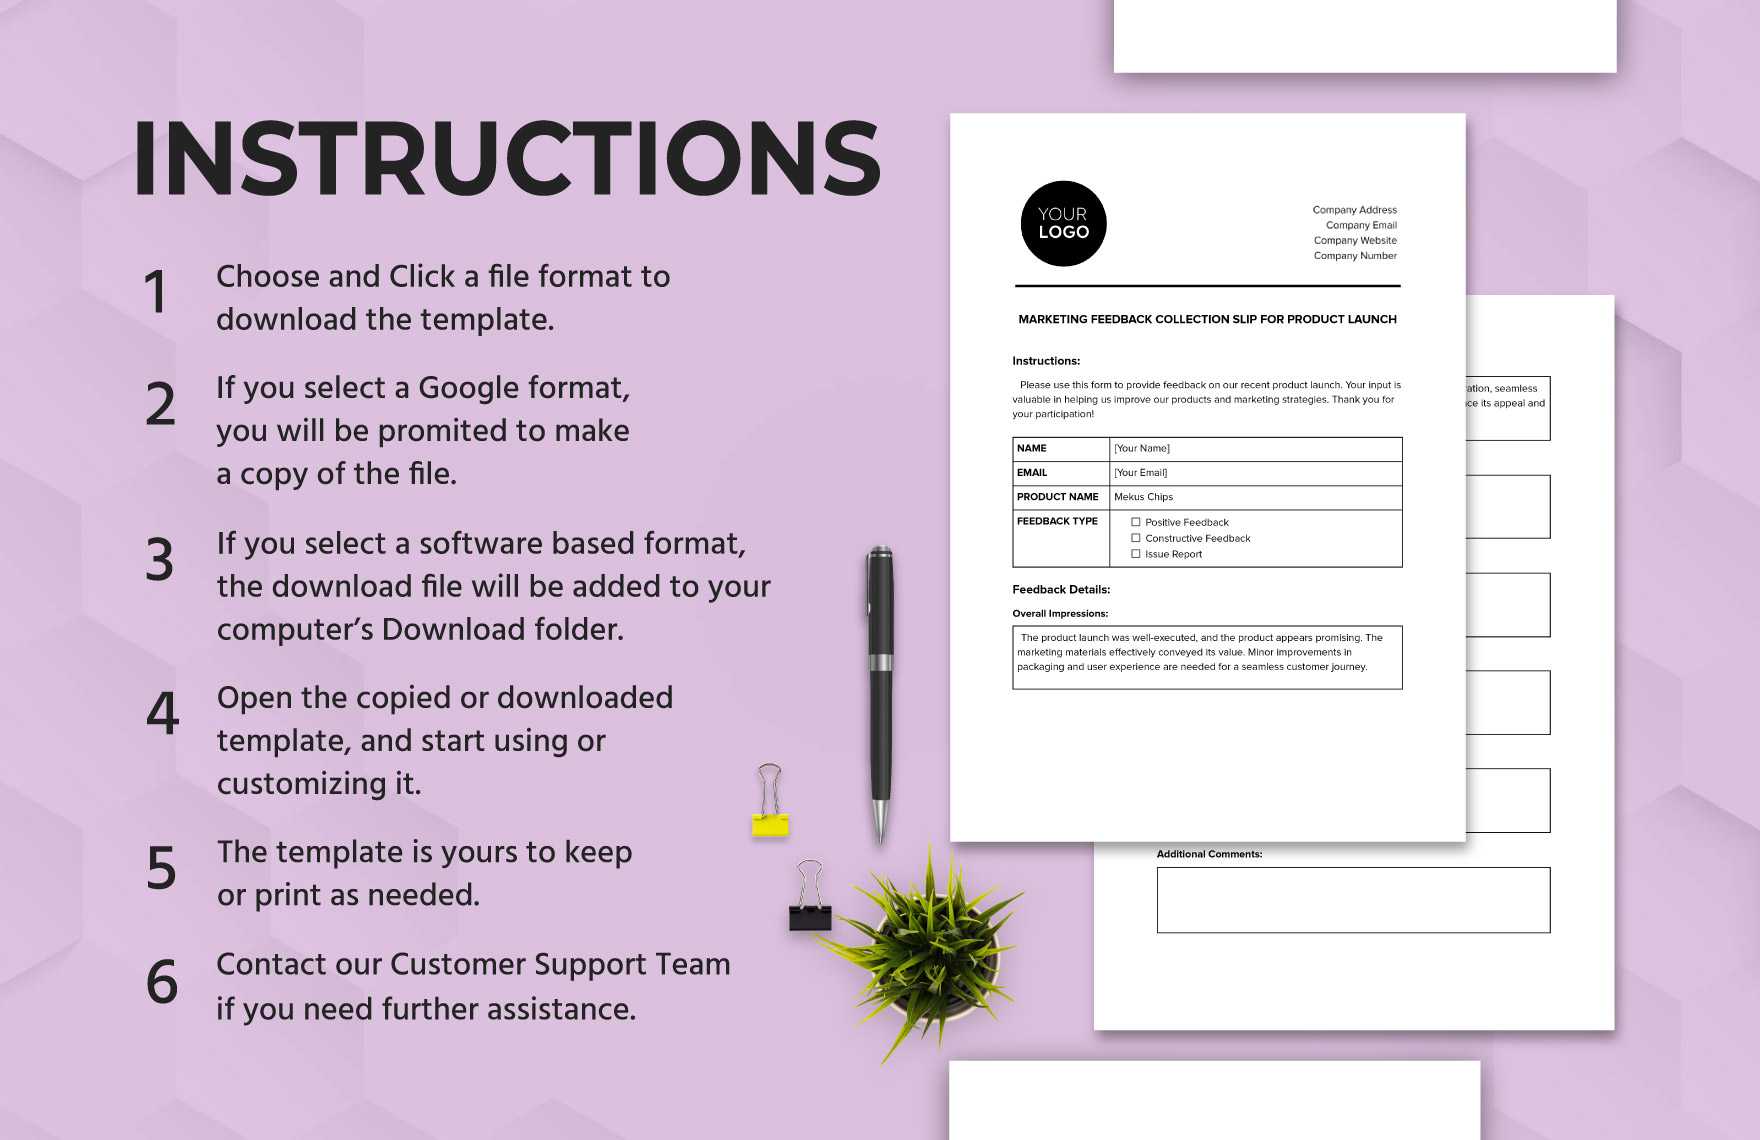 Marketing Feedback Collection Slip for Product Launch Template